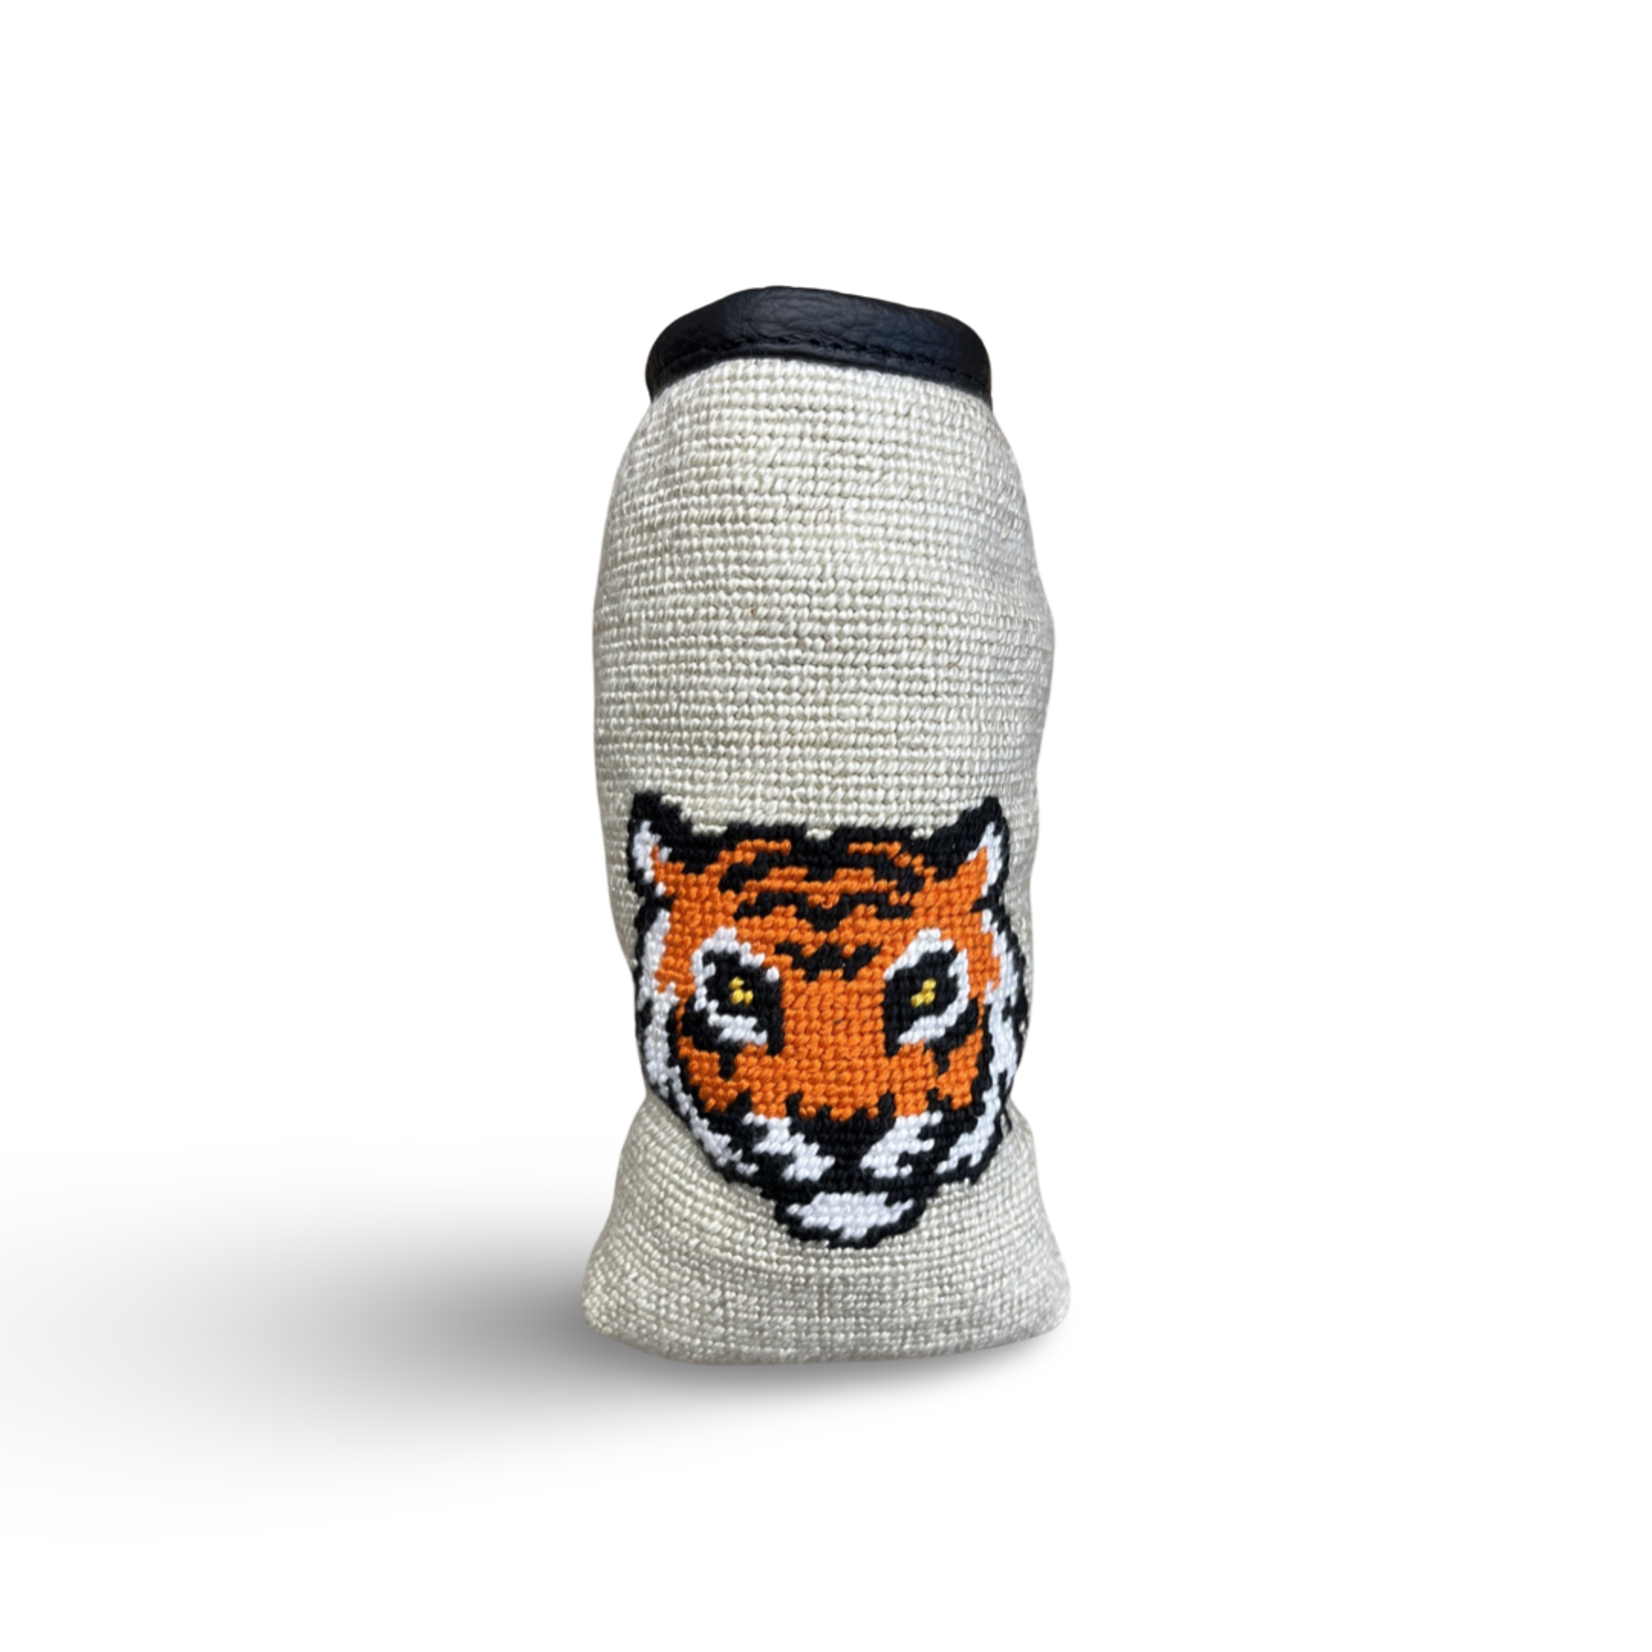 Smathers & Branson Smathers and Branson Putter Head Cover Tiger Head